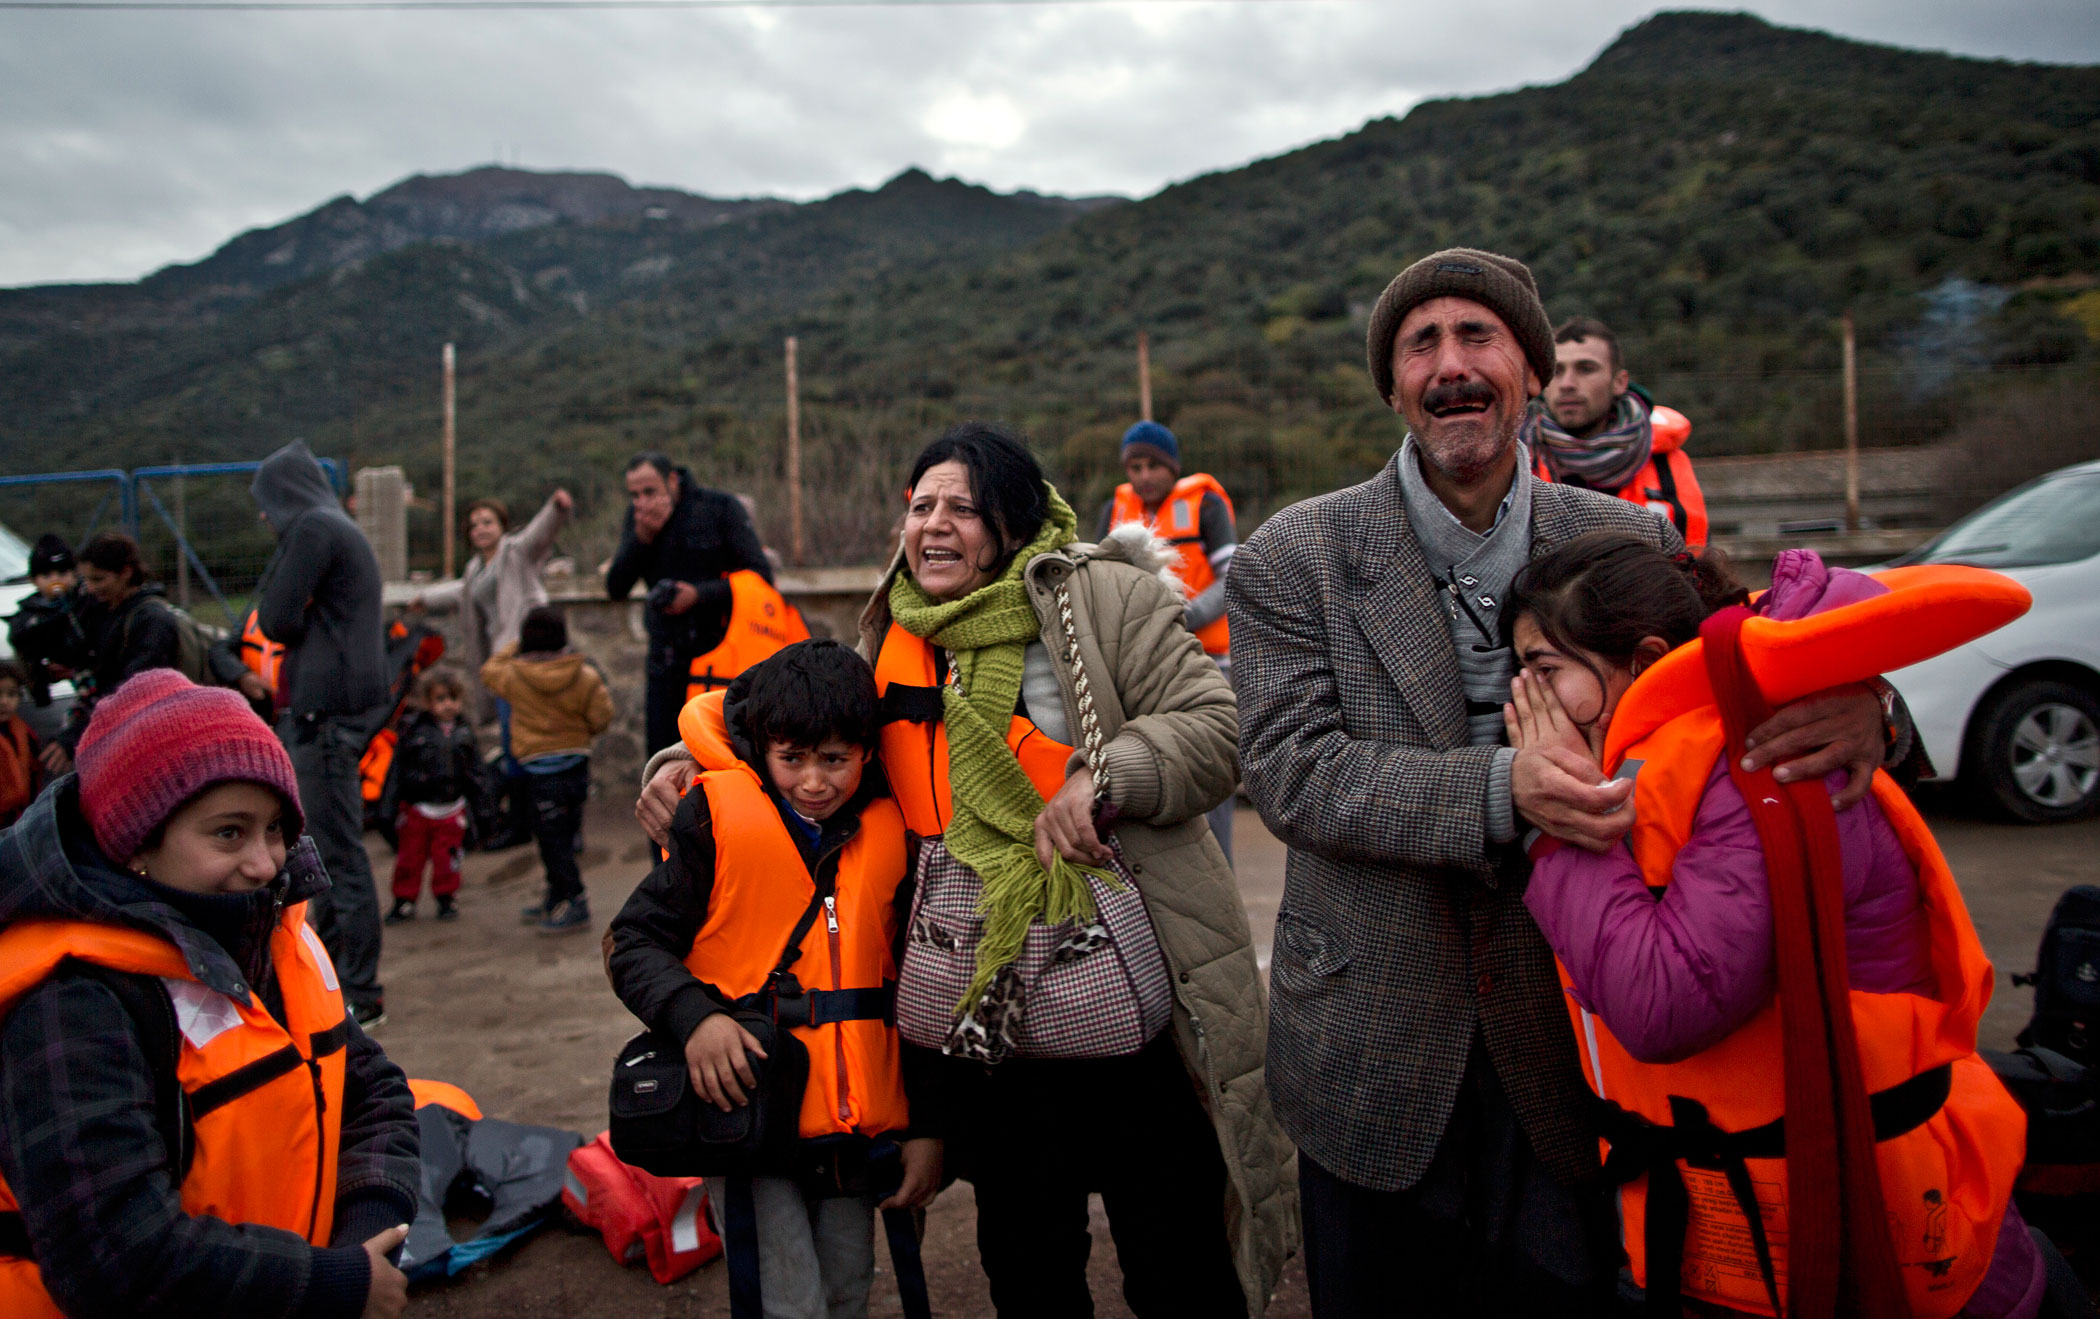 Yezidi refugee Samir Qasu, 45, from Sinjar, Iraq, and his wife Bessi, 42, cry while embracing two of their children, Dunia, 13, and Dildar, 10, shortly after arriving on a vessel from Turkey to the Greek island of Lesbos, Dec. 3, 2015.